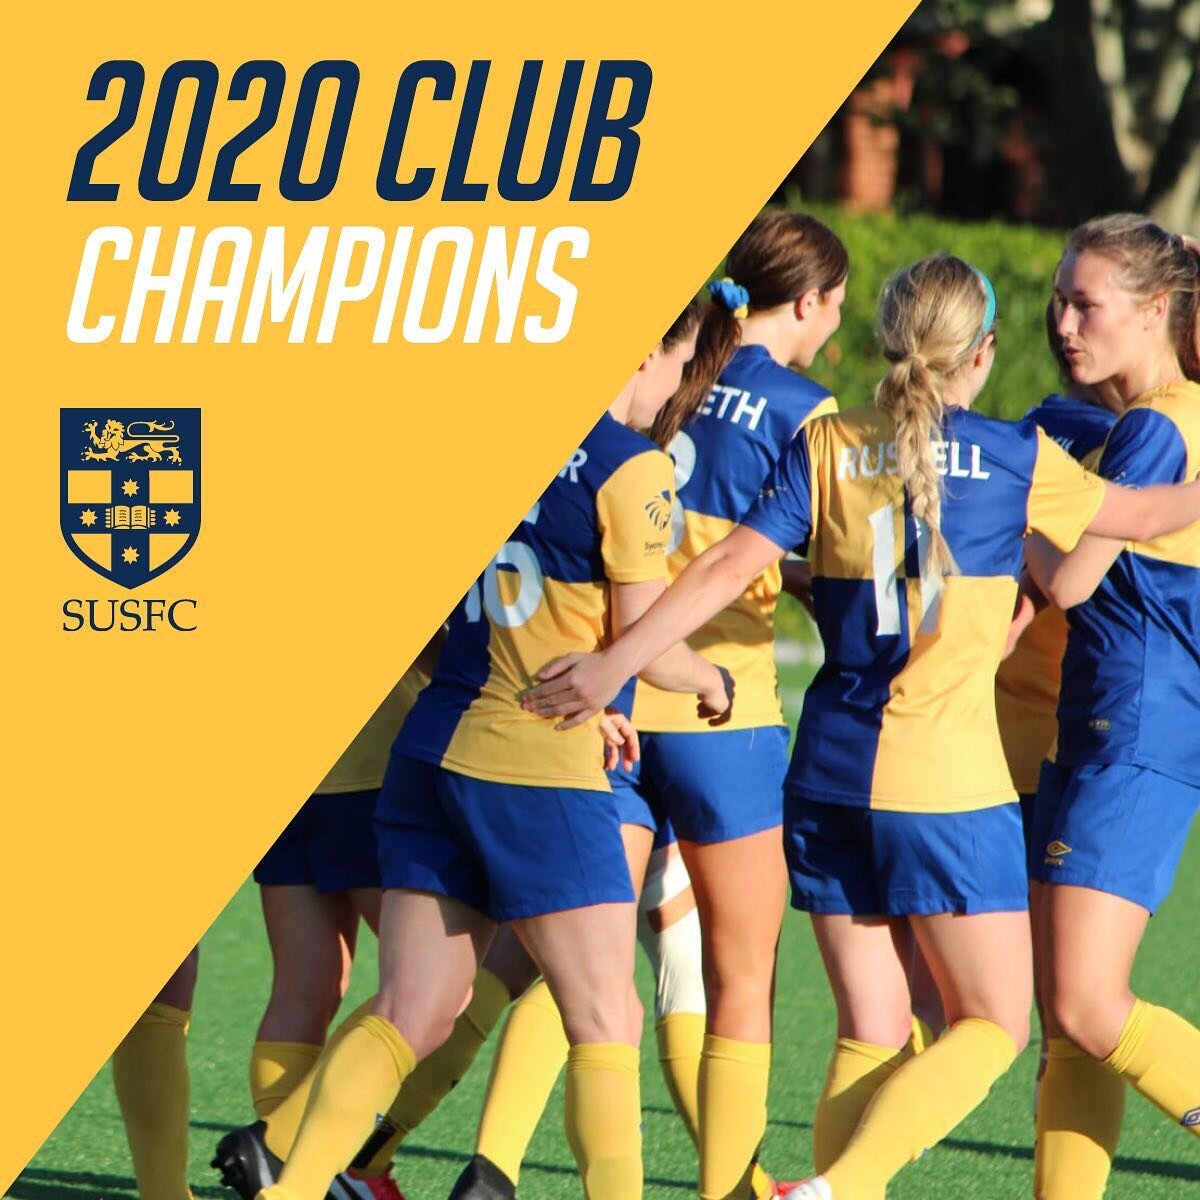 2020 CLUB CHAMPIONS - With one round to go our WNPL have also secured the 2020 Club Championship ⚽️🏆🙌🏼 #uptheuni